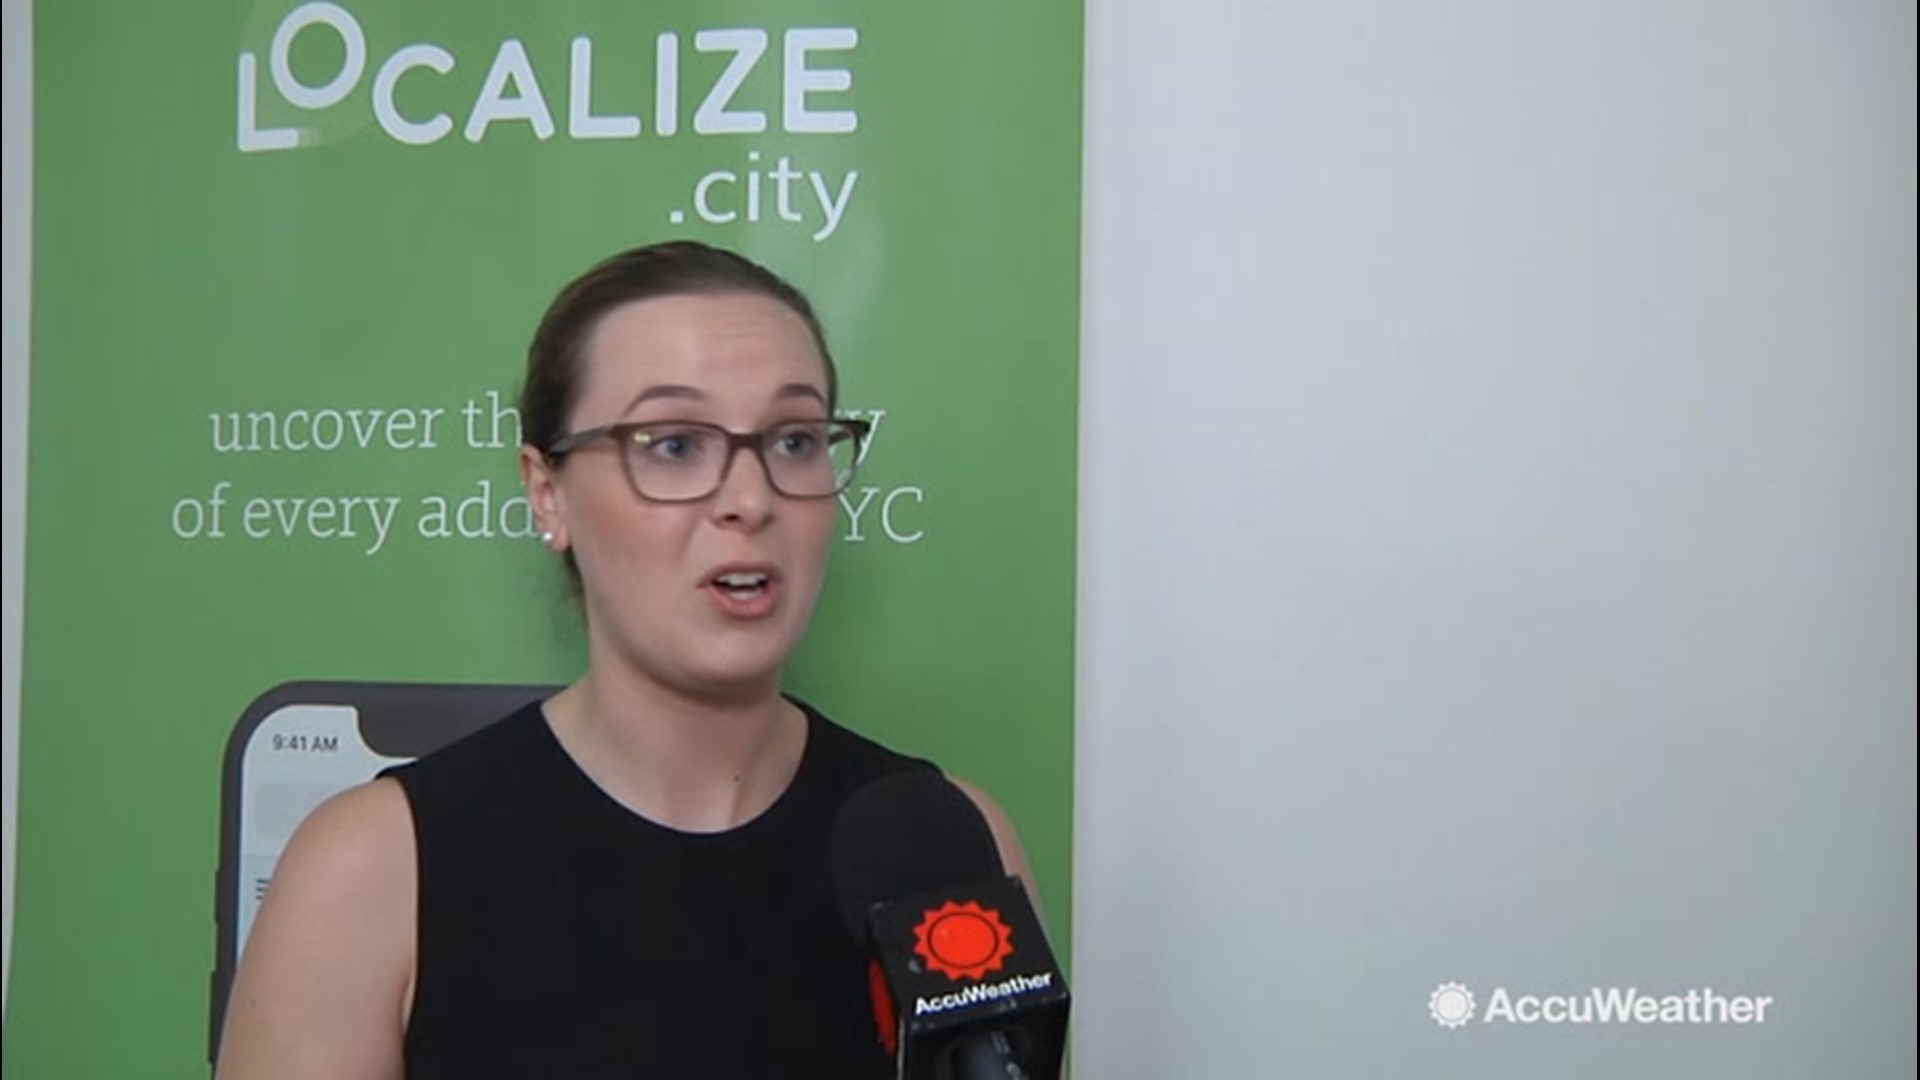 Olivia Jovine, the Urban Planning Analyst for Localize.City, talks about how sewage systems are affected in urban areas like the flash flooding we saw on July 22 in New York City.